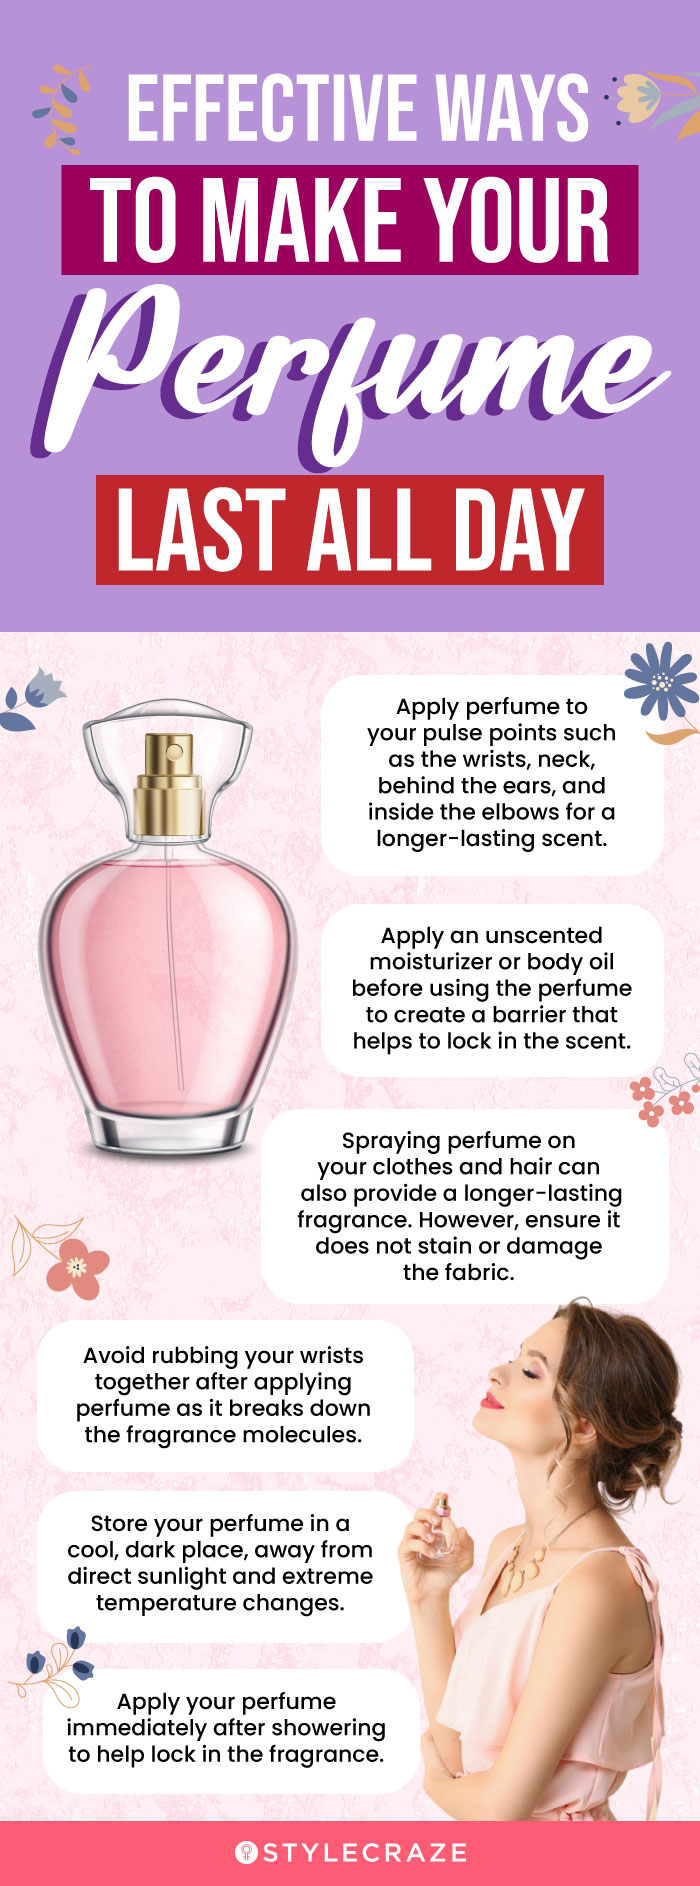 Effective Ways To Make Your Perfume Last All Day (infographic)